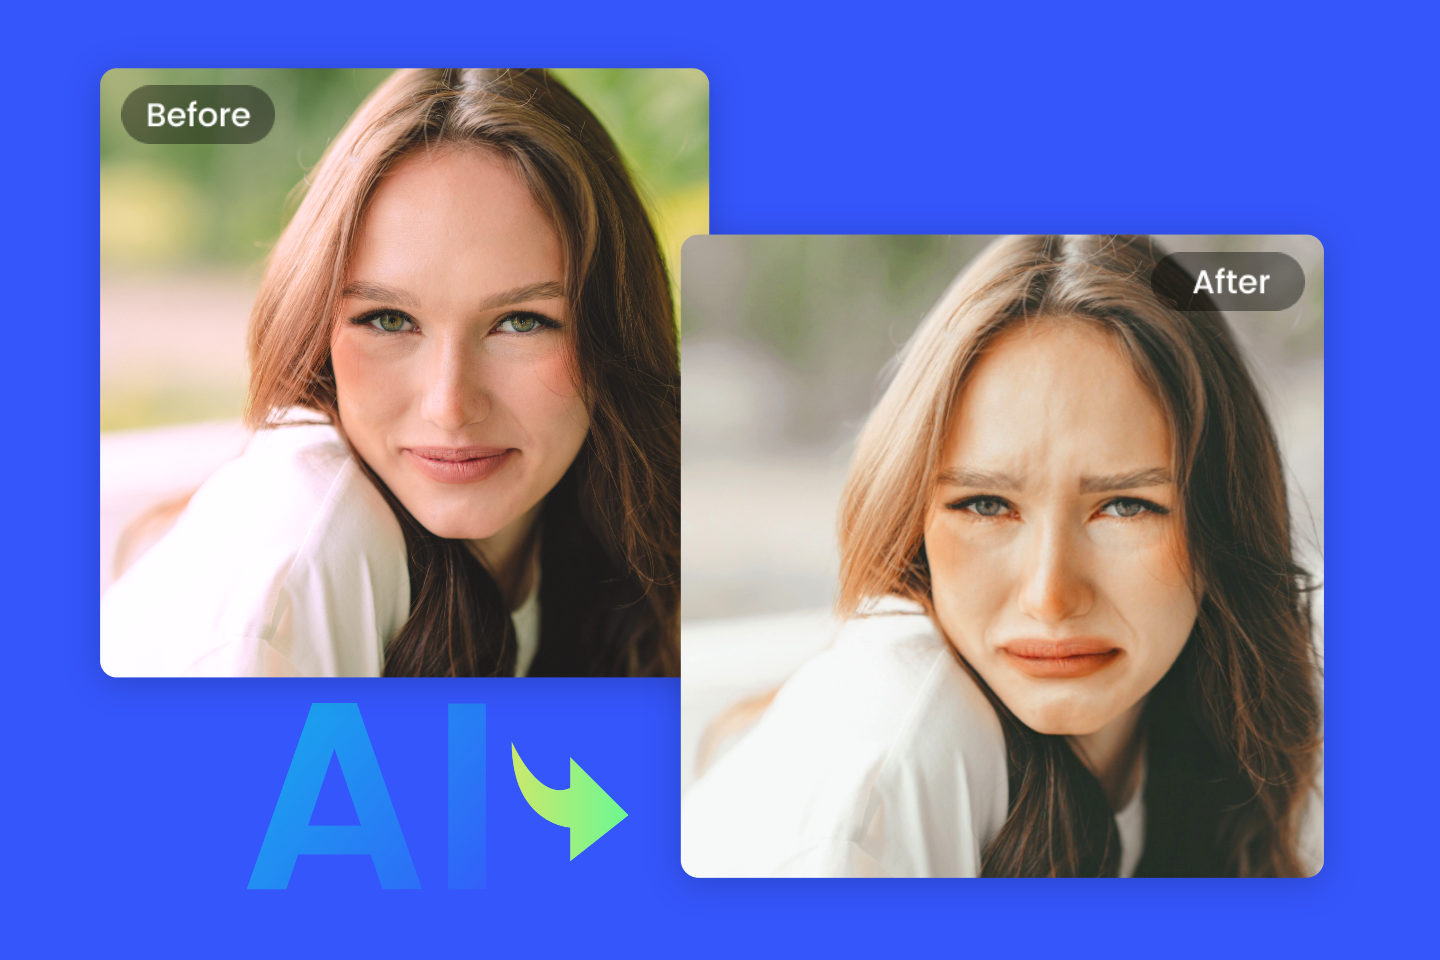 Use fotor online sad face filter to turn female facial exoression into sad face